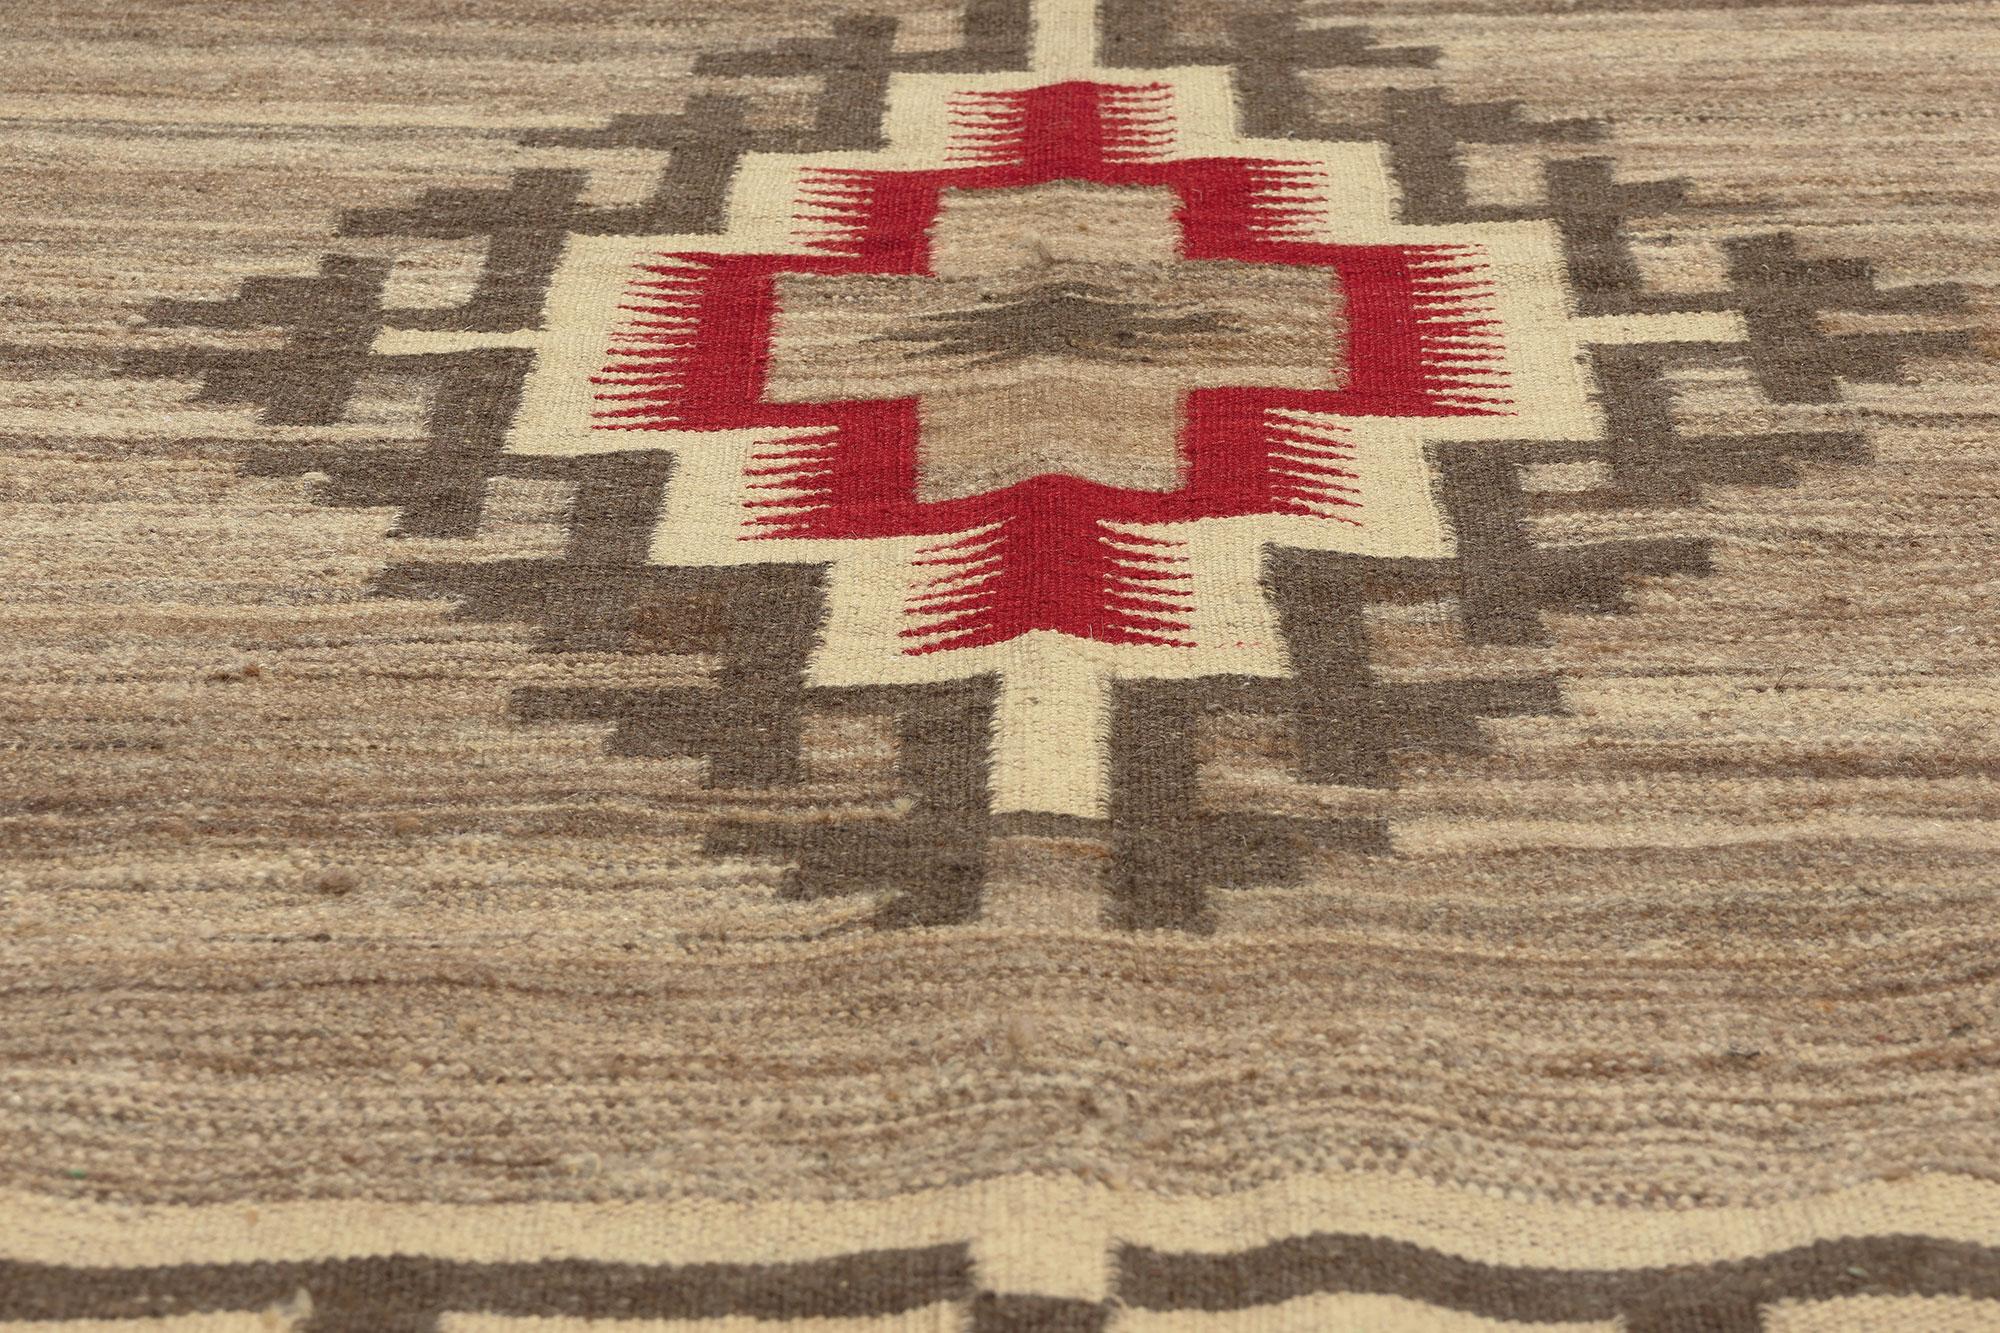 Contemporary Santa Fe Southwest Modern Navajo-Style Rug with Storm Pattern In New Condition For Sale In Dallas, TX